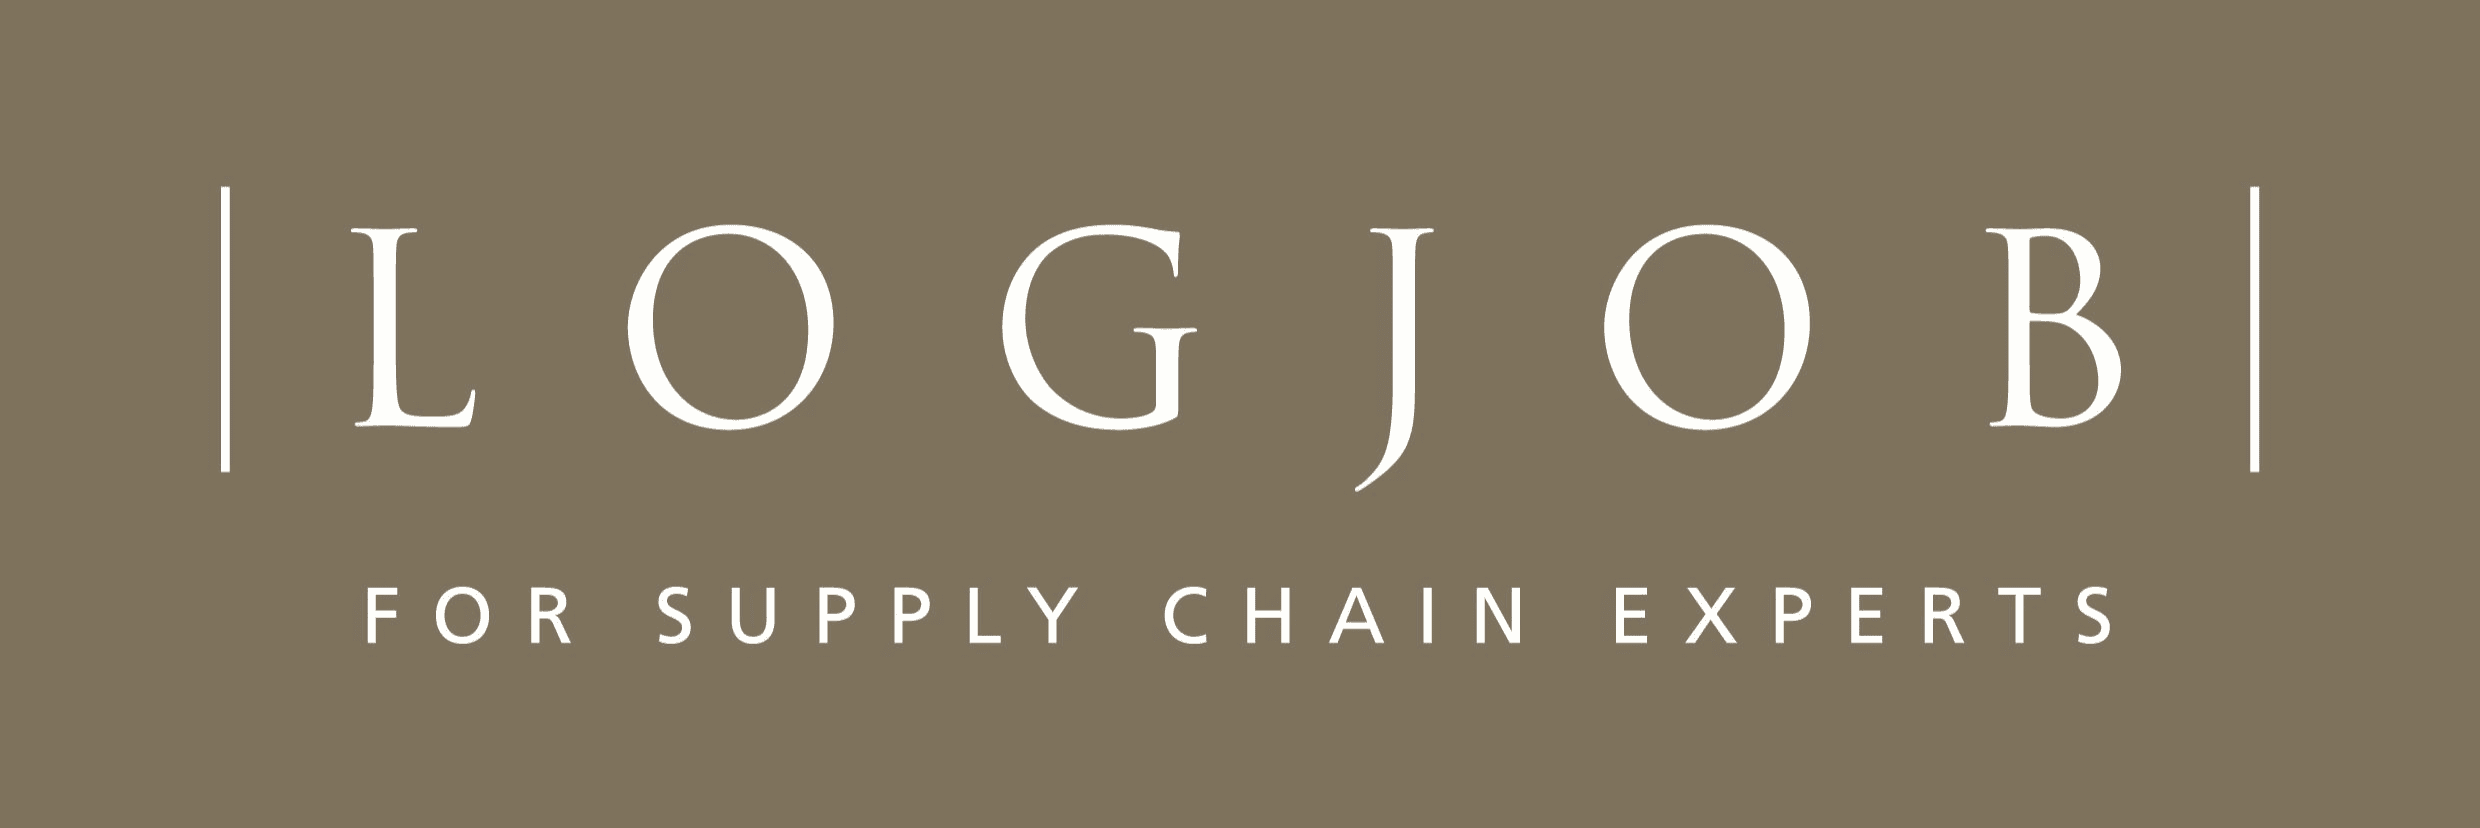 Logjob AG - For Supply Chain Experts